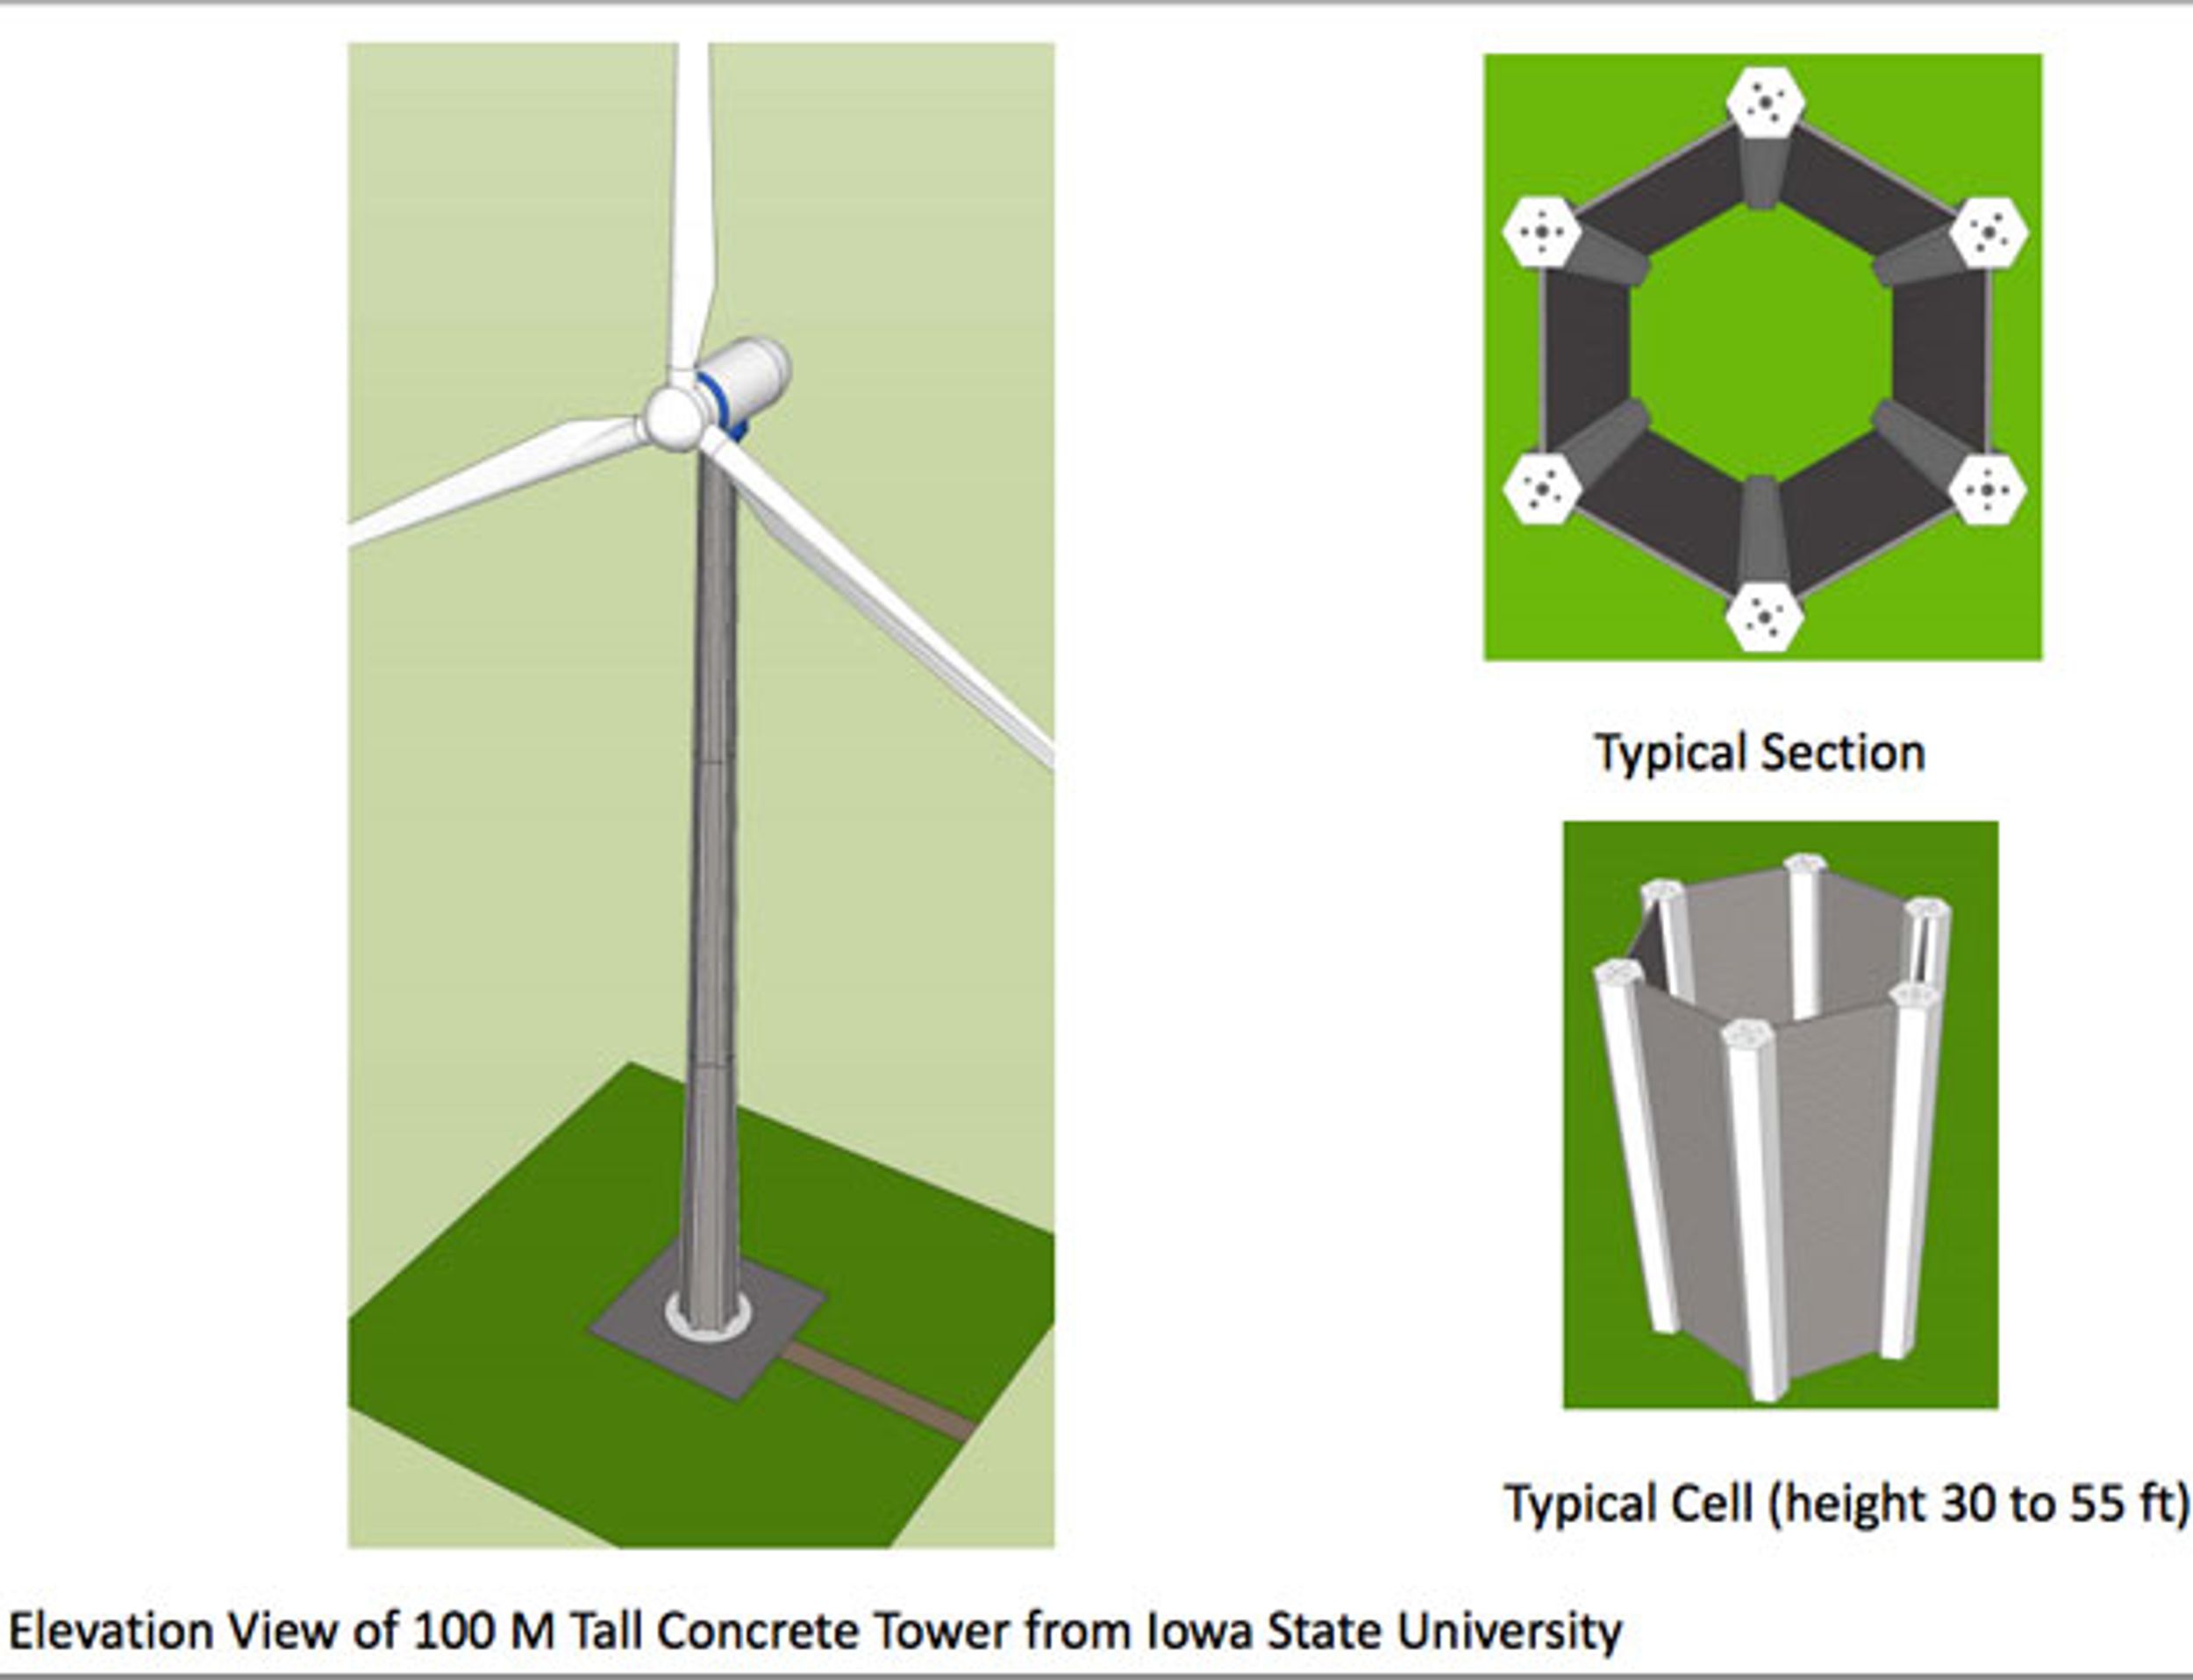 Too Tall for Steel: Engineers Look to Concrete to Take Wind Turbine Design to New Heights